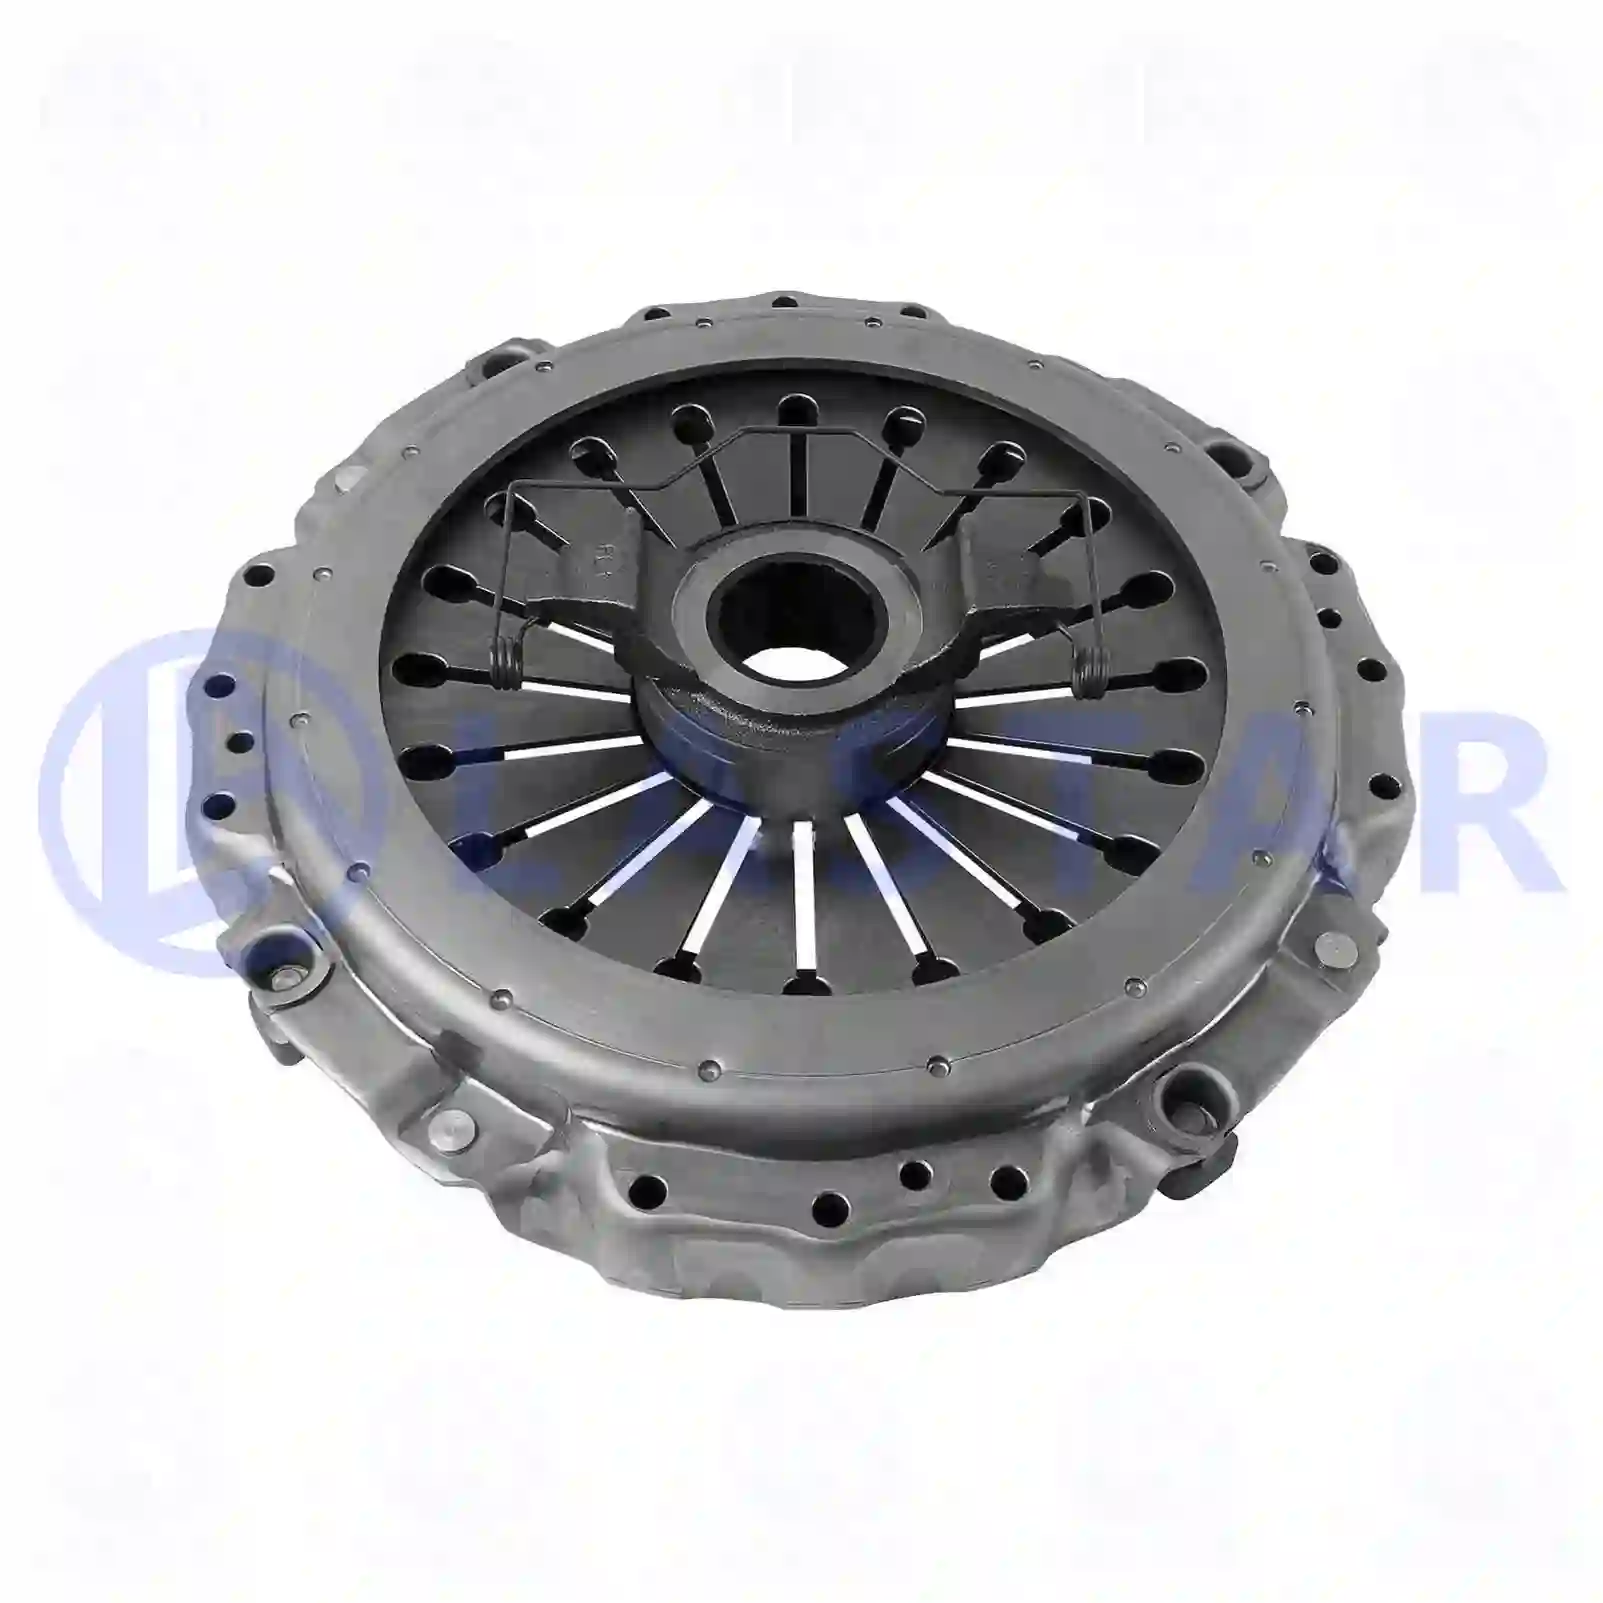 Clutch cover, with release bearing, 77722263, 1521721, 1669116, 1669827, 1672935, 20569126, 20575561, 3192200, 3192210, 8113463, 8113513, 8113529, 8116463, 8116513, 8119463, 8119513, 8119529, 85000393, 85000523, 85000527, 85006393 ||  77722263 Lastar Spare Part | Truck Spare Parts, Auotomotive Spare Parts Clutch cover, with release bearing, 77722263, 1521721, 1669116, 1669827, 1672935, 20569126, 20575561, 3192200, 3192210, 8113463, 8113513, 8113529, 8116463, 8116513, 8119463, 8119513, 8119529, 85000393, 85000523, 85000527, 85006393 ||  77722263 Lastar Spare Part | Truck Spare Parts, Auotomotive Spare Parts